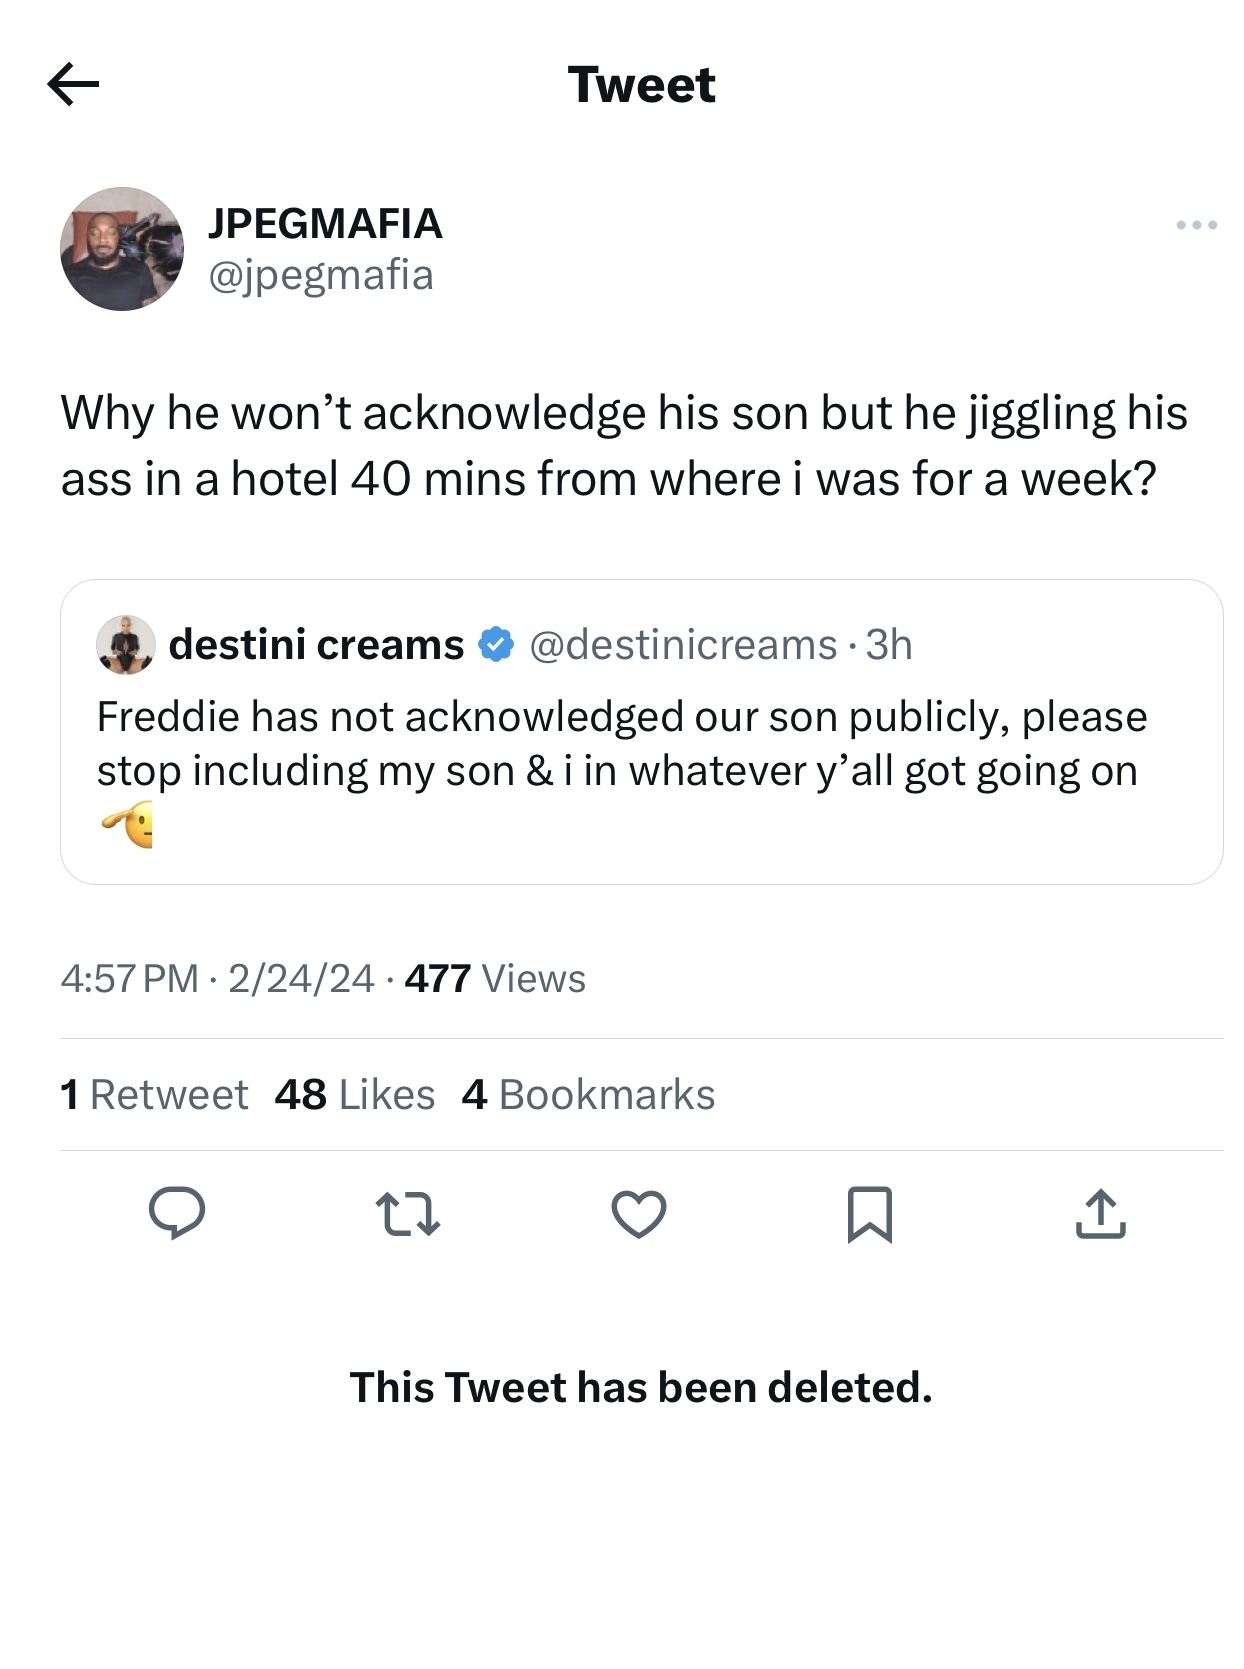 Screenshot of a tweet reply about someone not acknowledging their son, indicating the original tweet was deleted